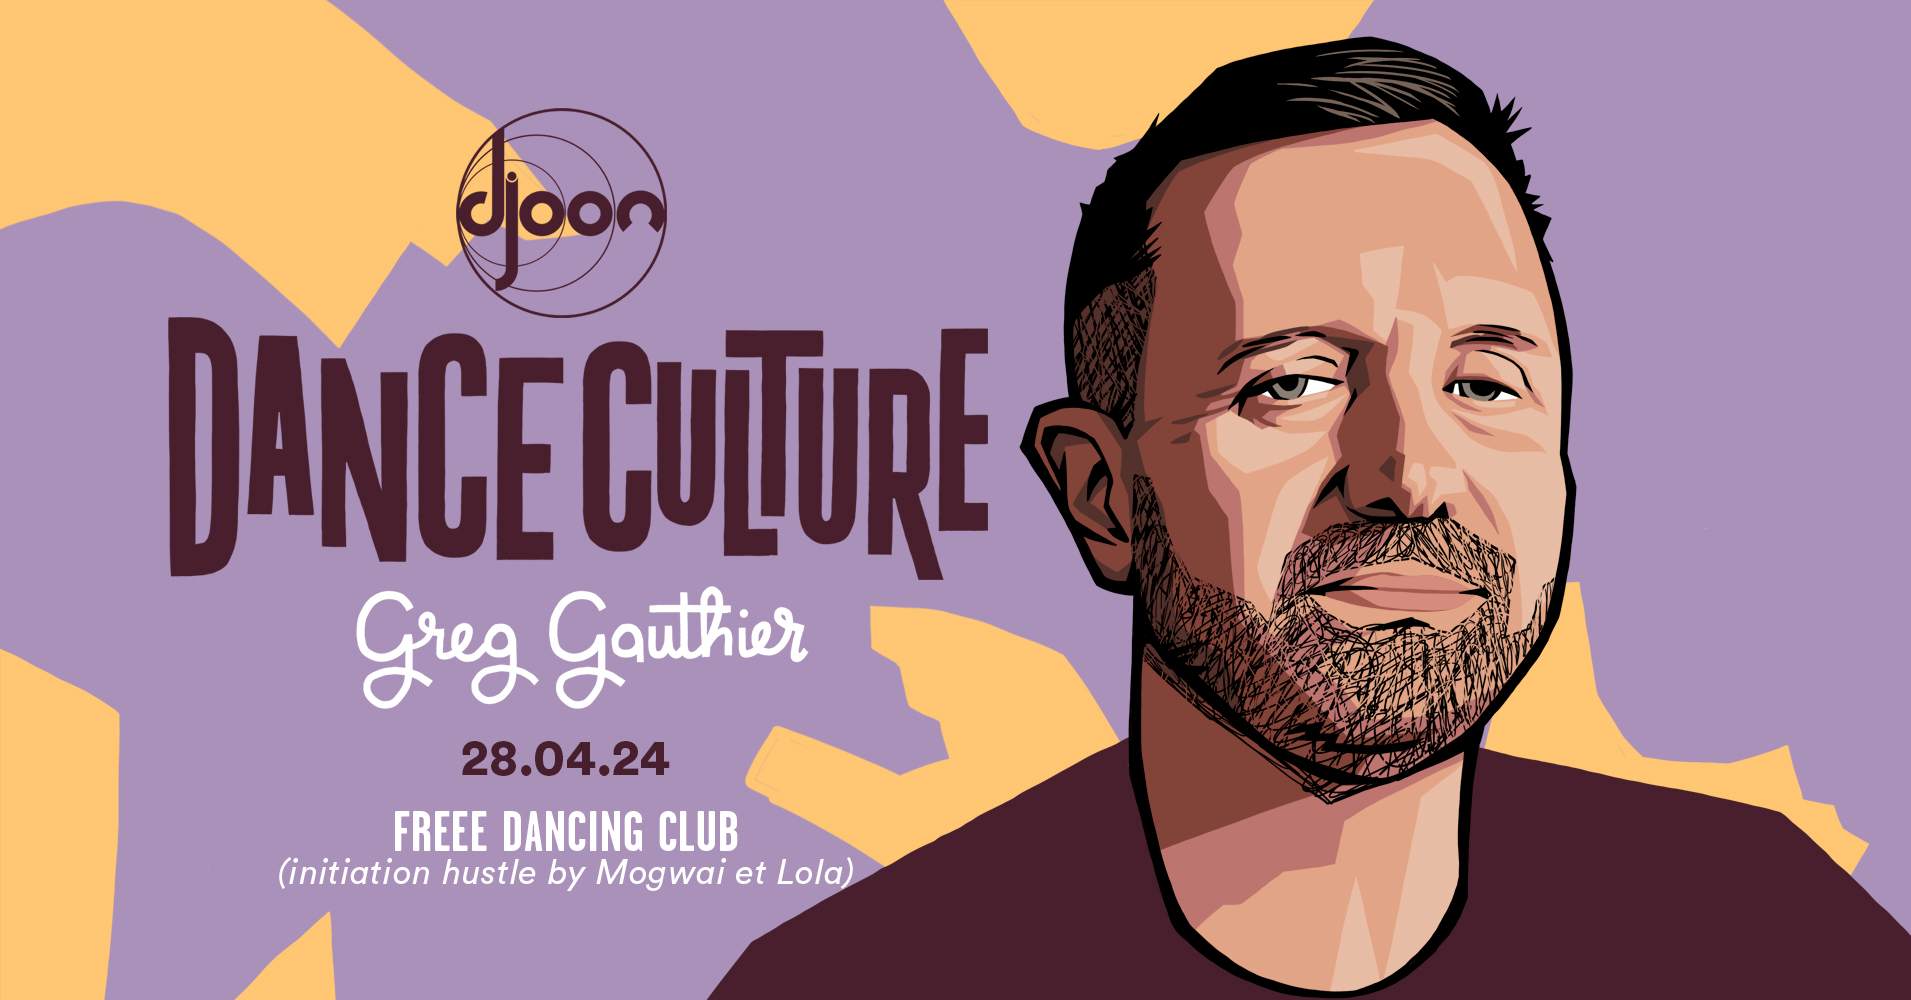 Djoon: Dance Culture with Greg Gauthier - フライヤー表